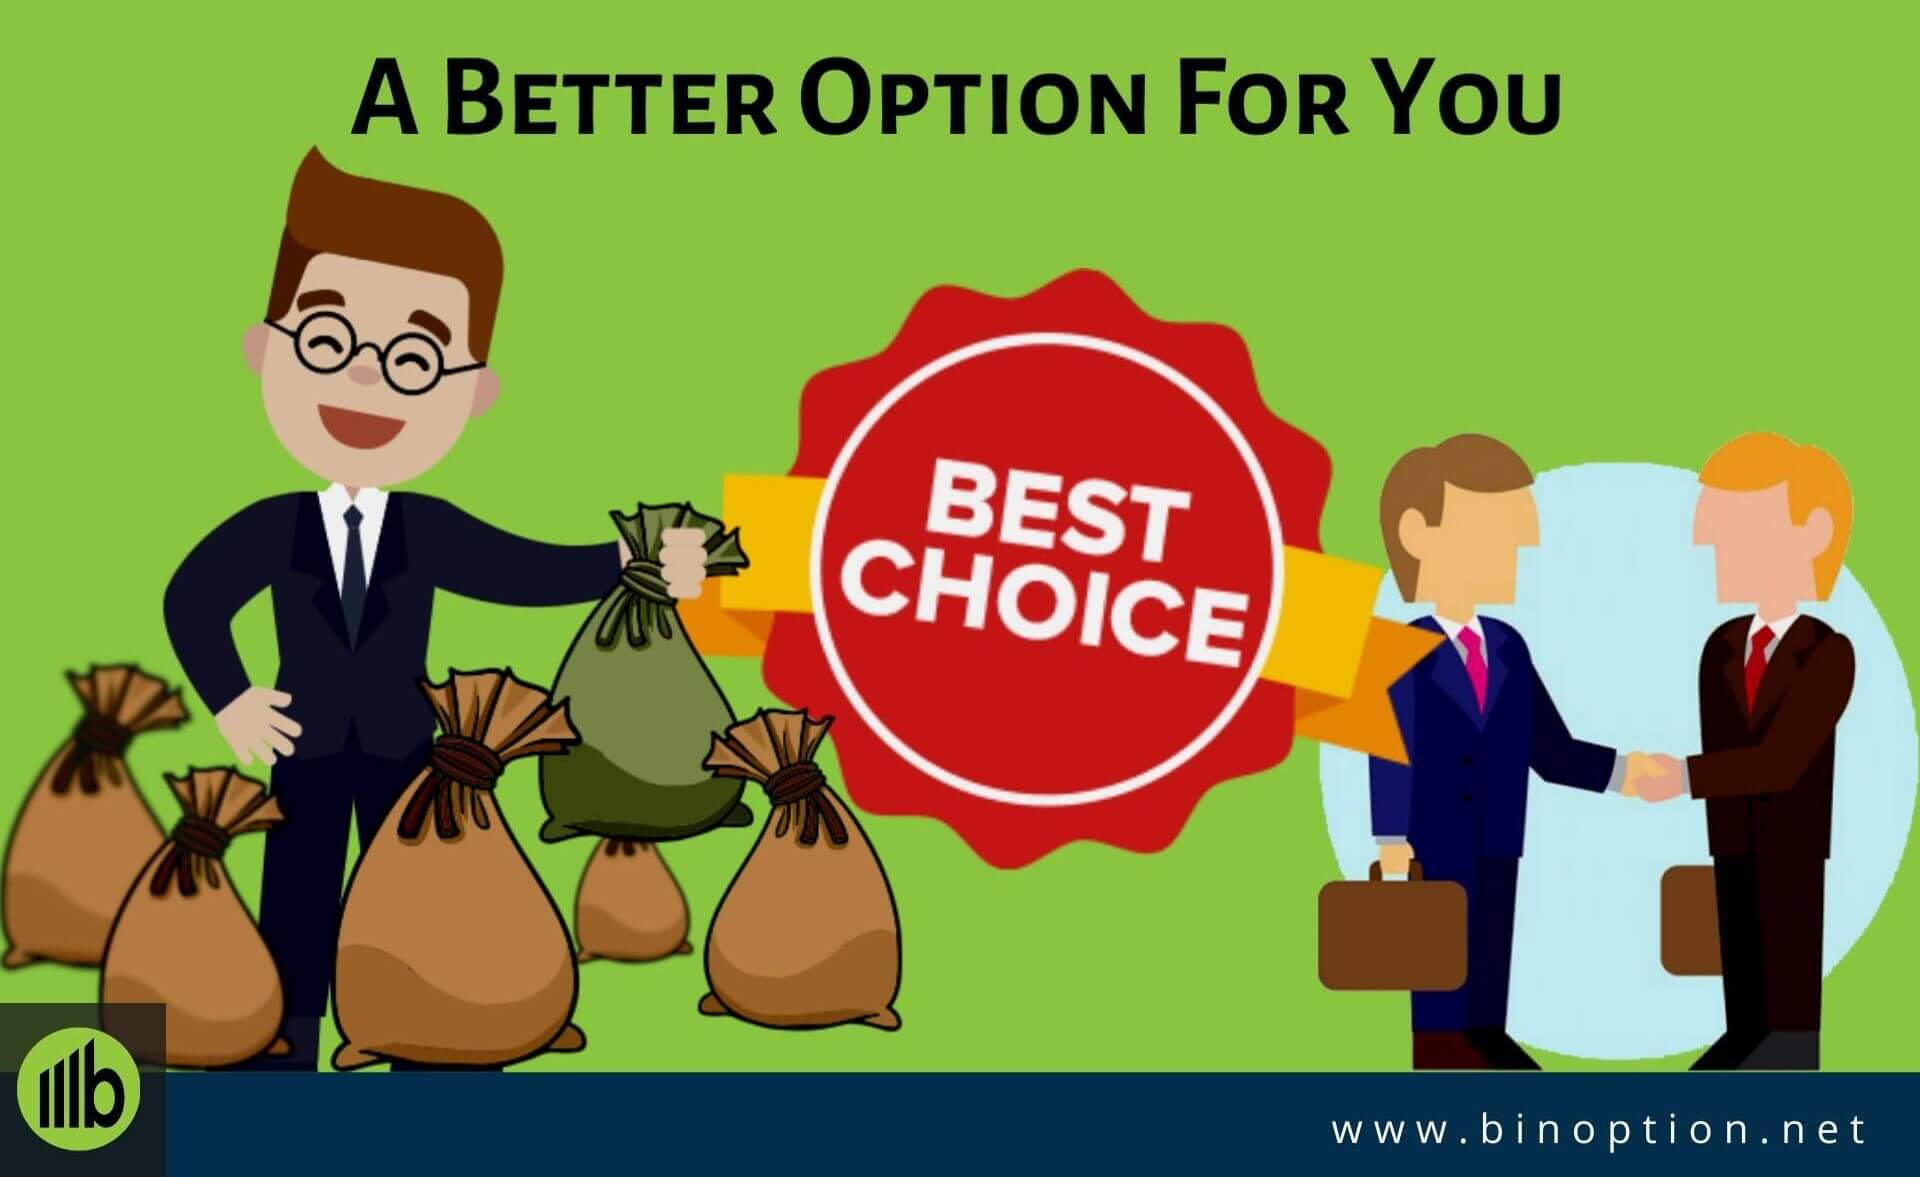 A Better Option For You-Binoption